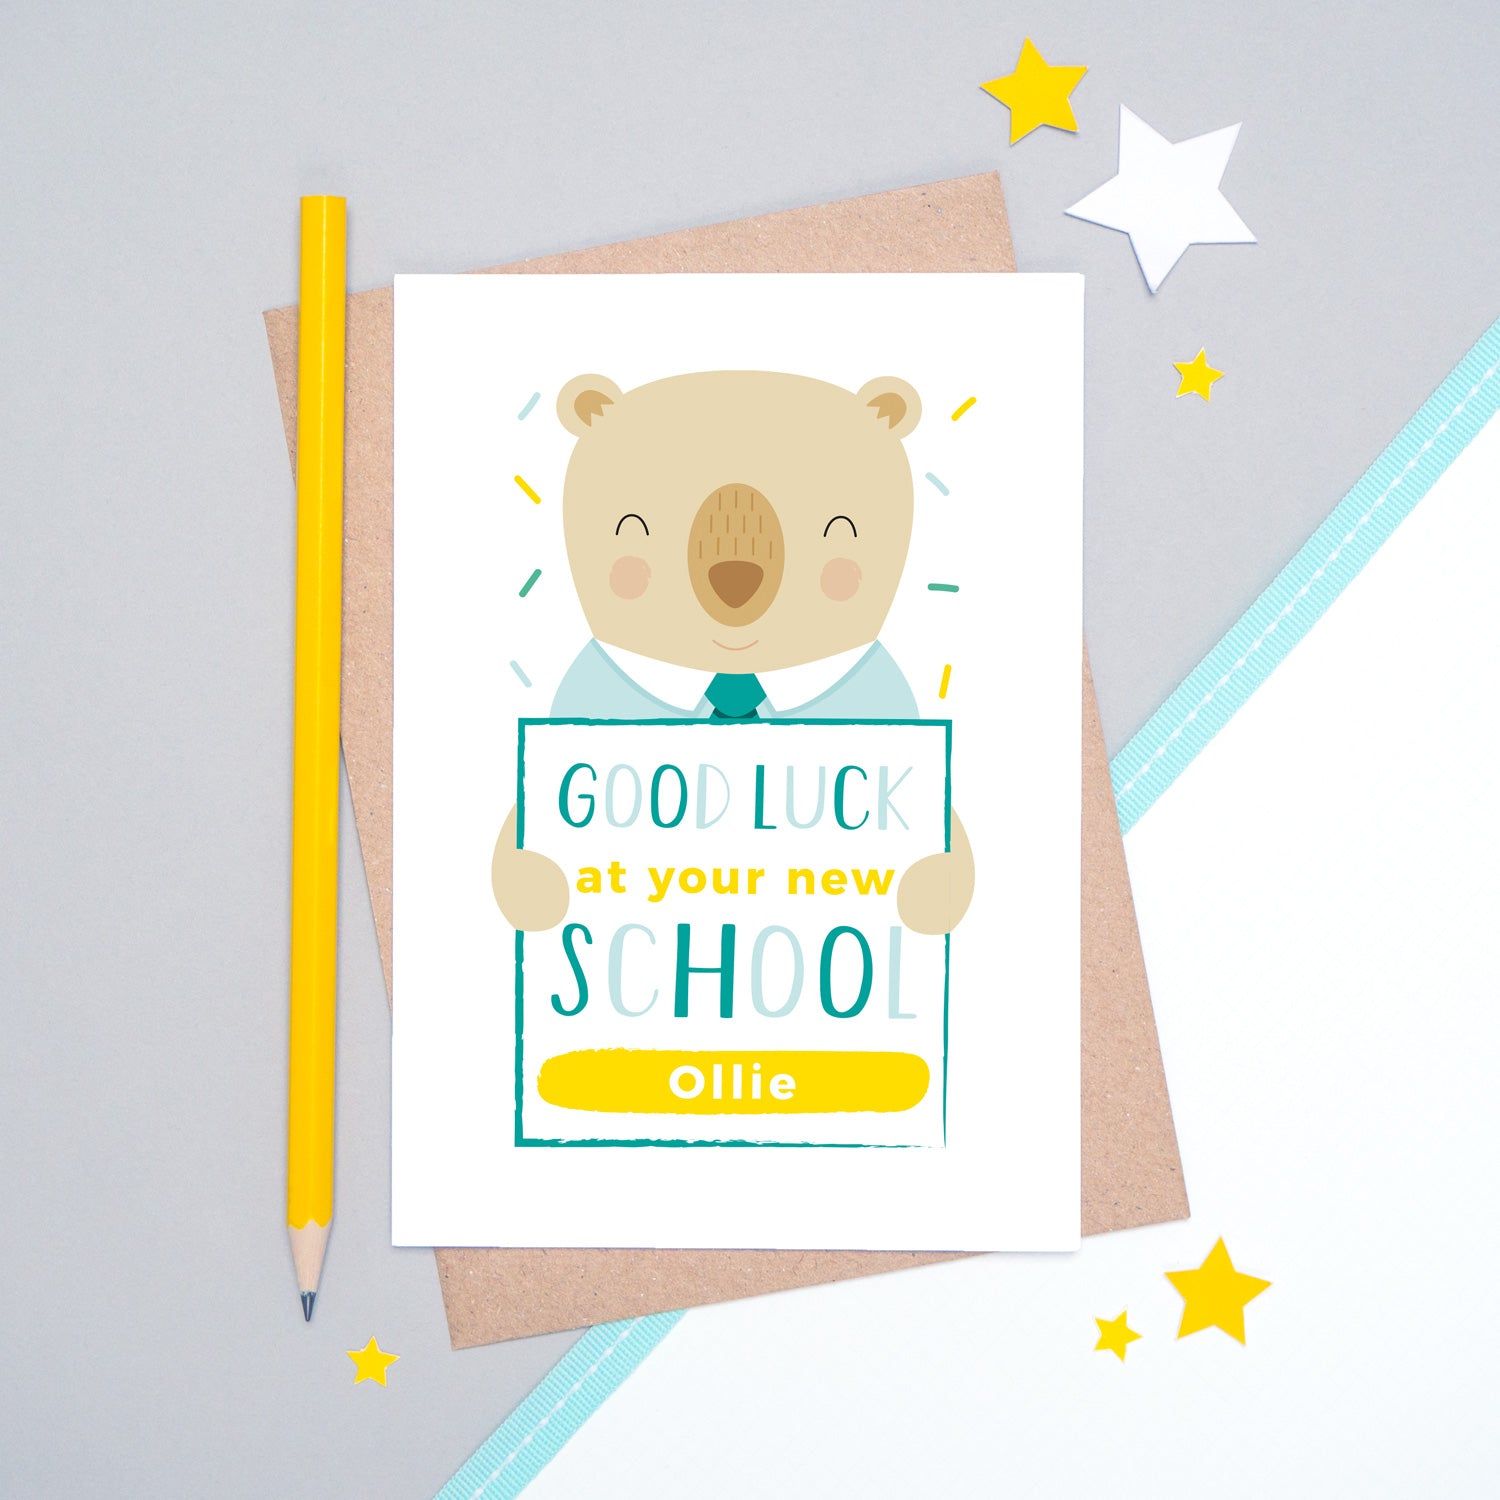 A good luck at your new school personalised card featuring a friendly bear sat on a grey and white background.